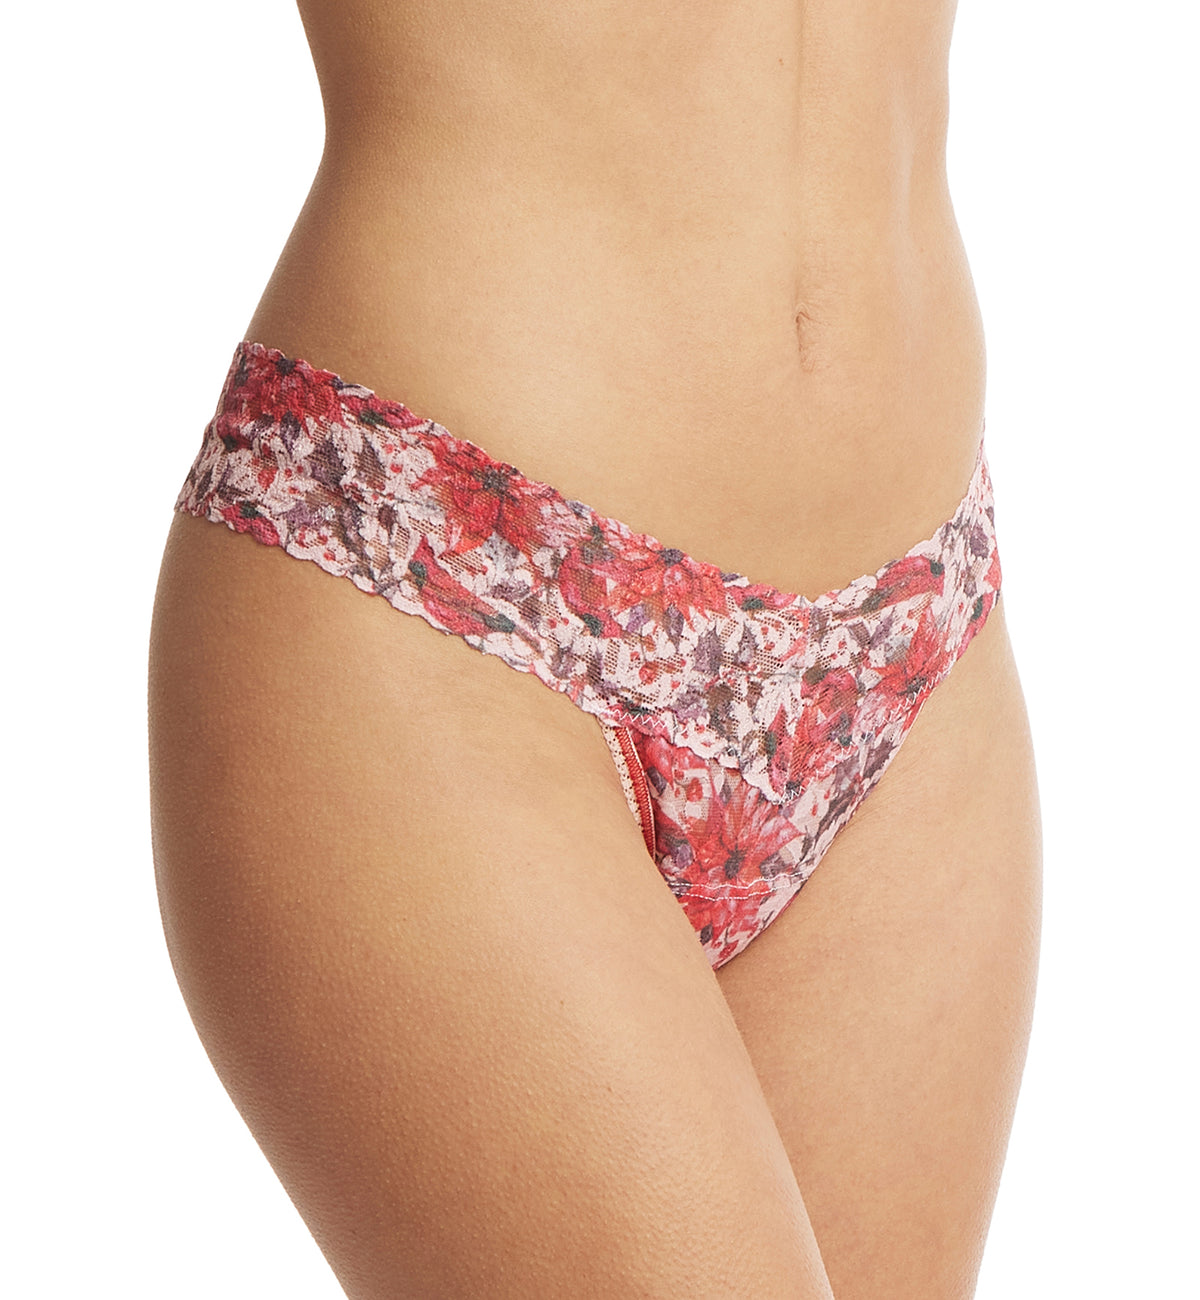 Hanky Panky Signature Lace Printed Low Rise Thong (PR4911P),Poinsettia - Poinsettia,One Size